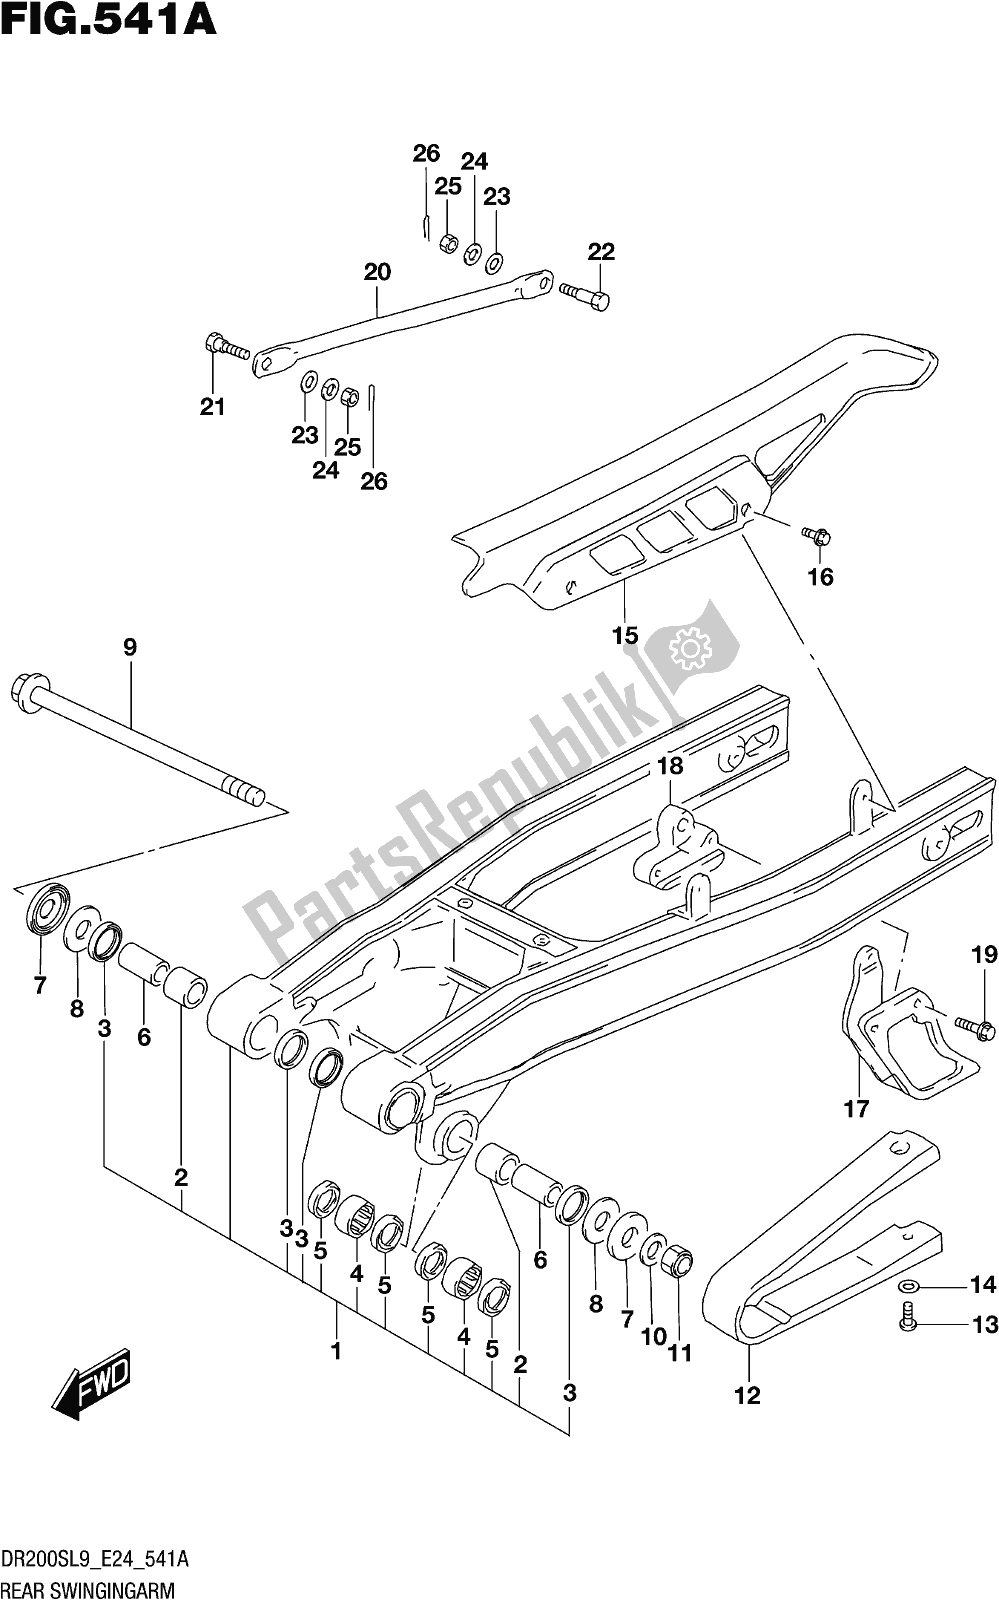 All parts for the Fig. 541a Rear Swingingarm of the Suzuki DR 200S 2019